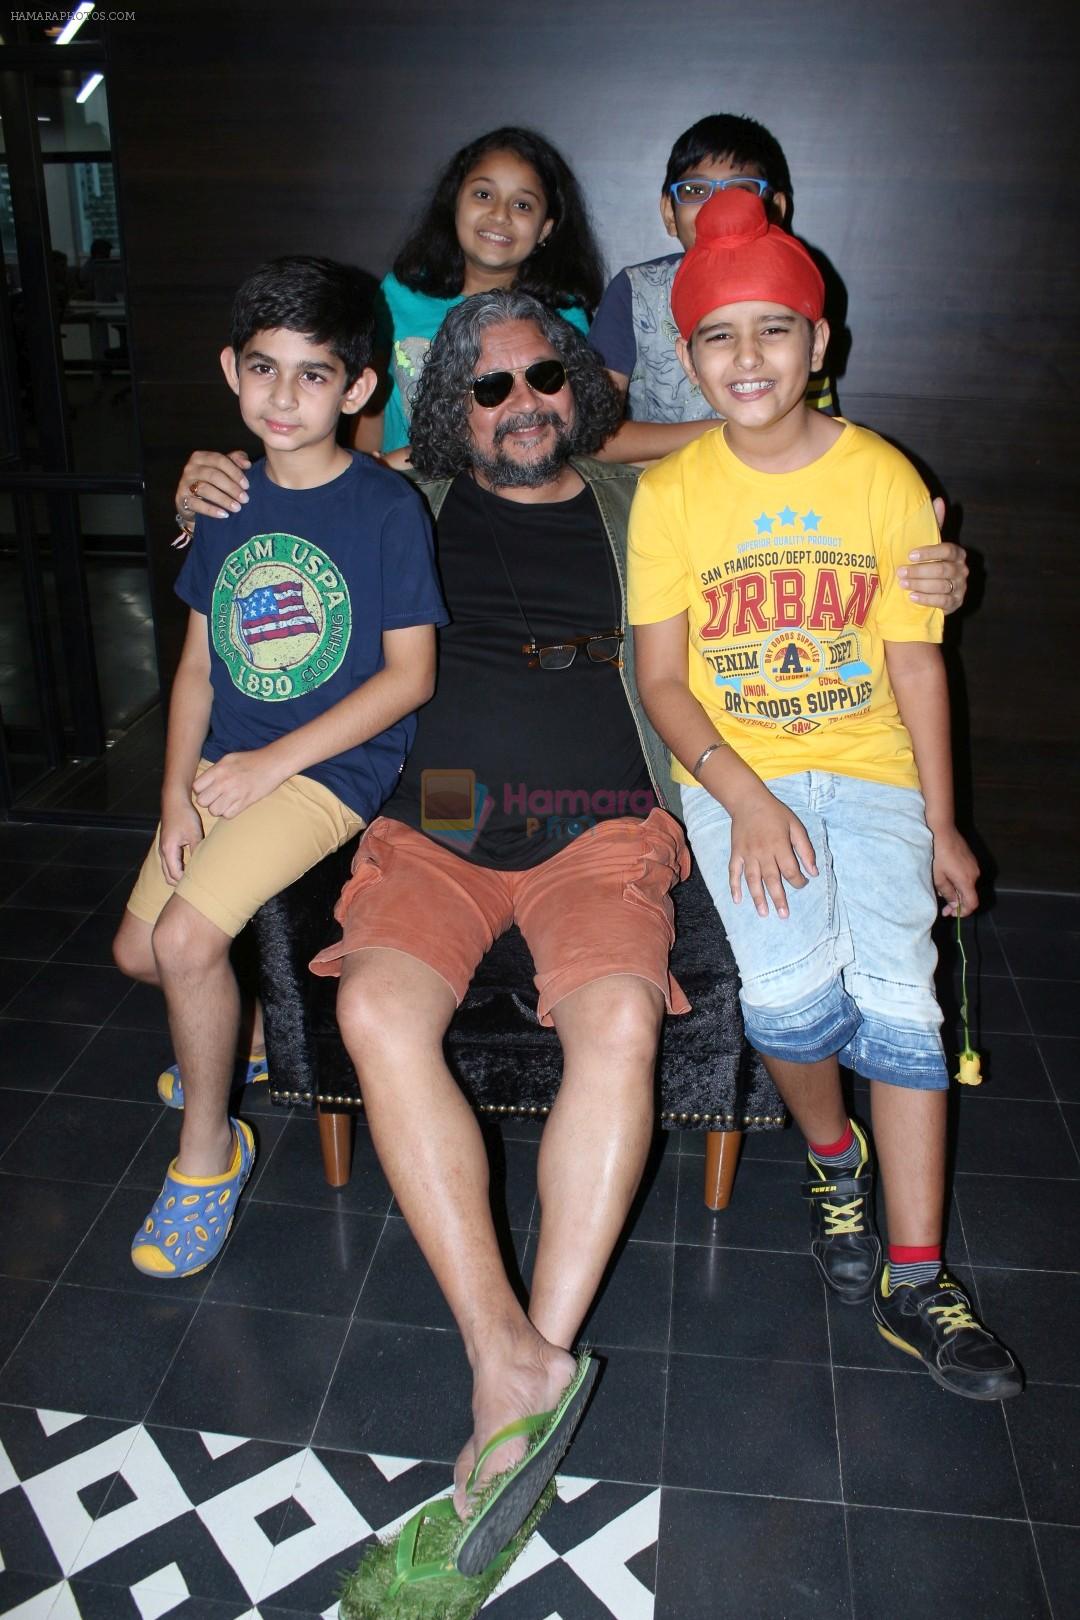 Amole Gupte, Sunny Gill at Sniff Movie Activity on 19th July 2017